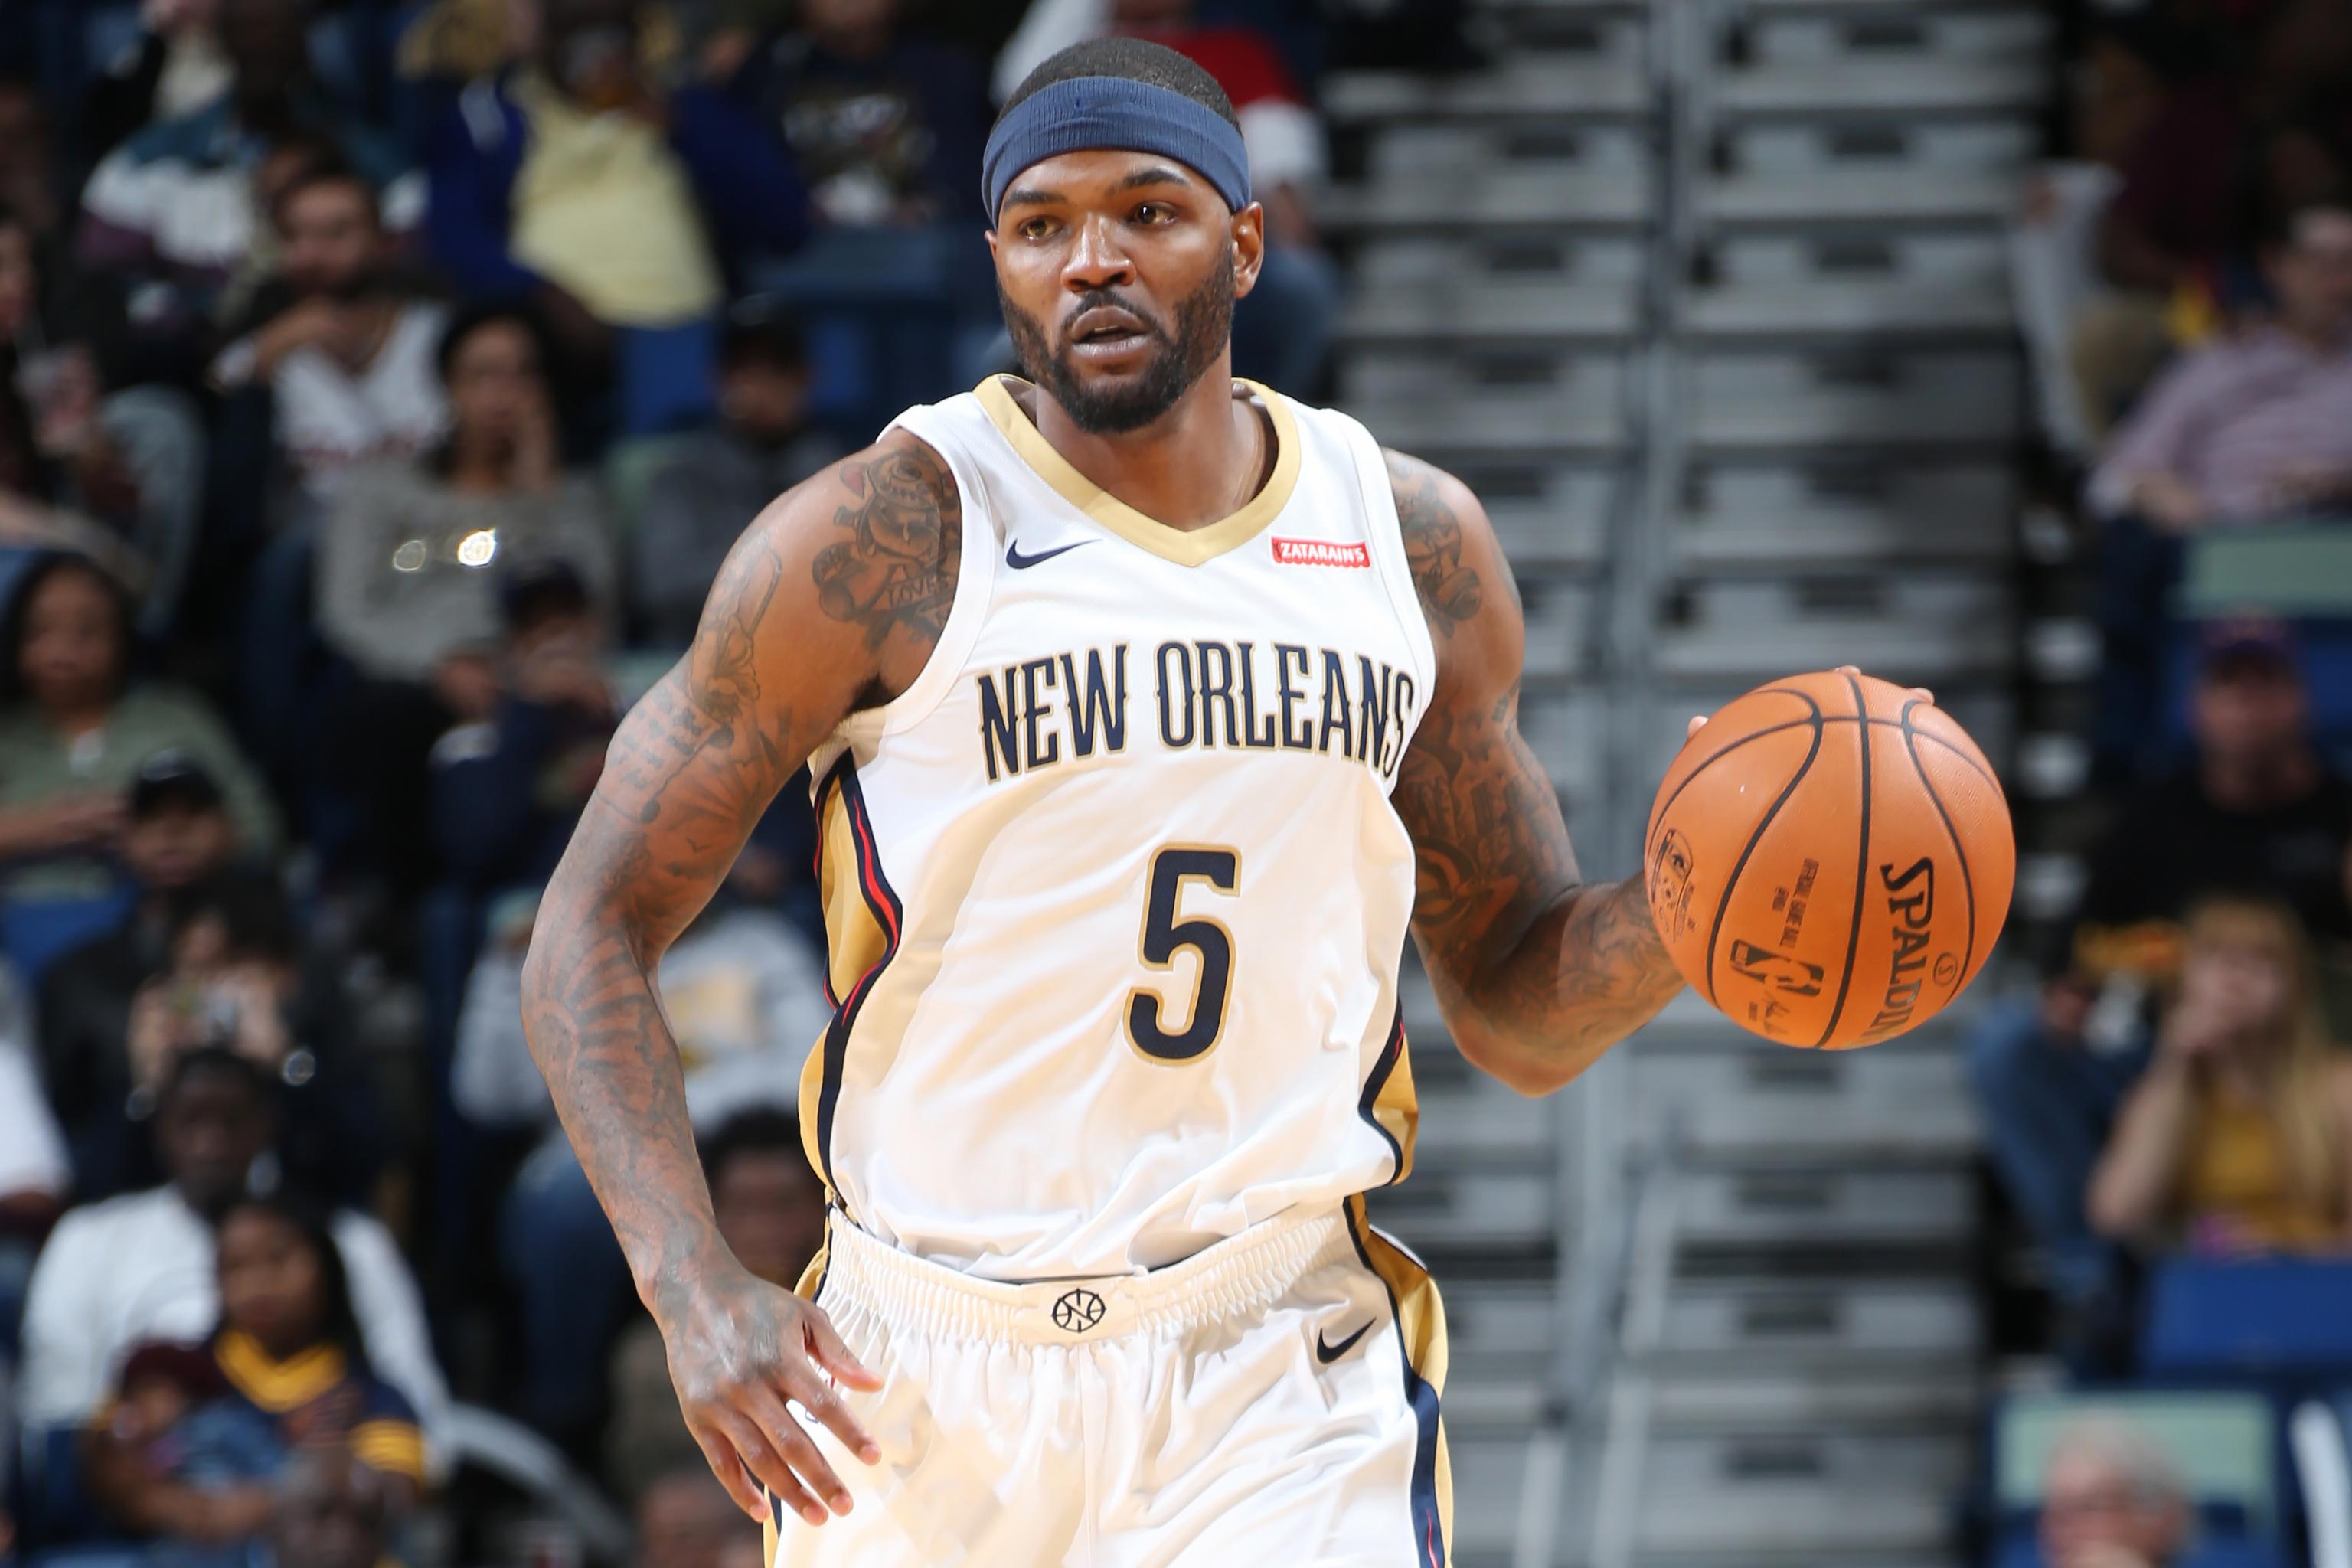 Nba Rumors Ex Hawks Star Josh Smith Working Out Daily In Hopes Of Nba Return Bleacher Report Latest News Videos And Highlights